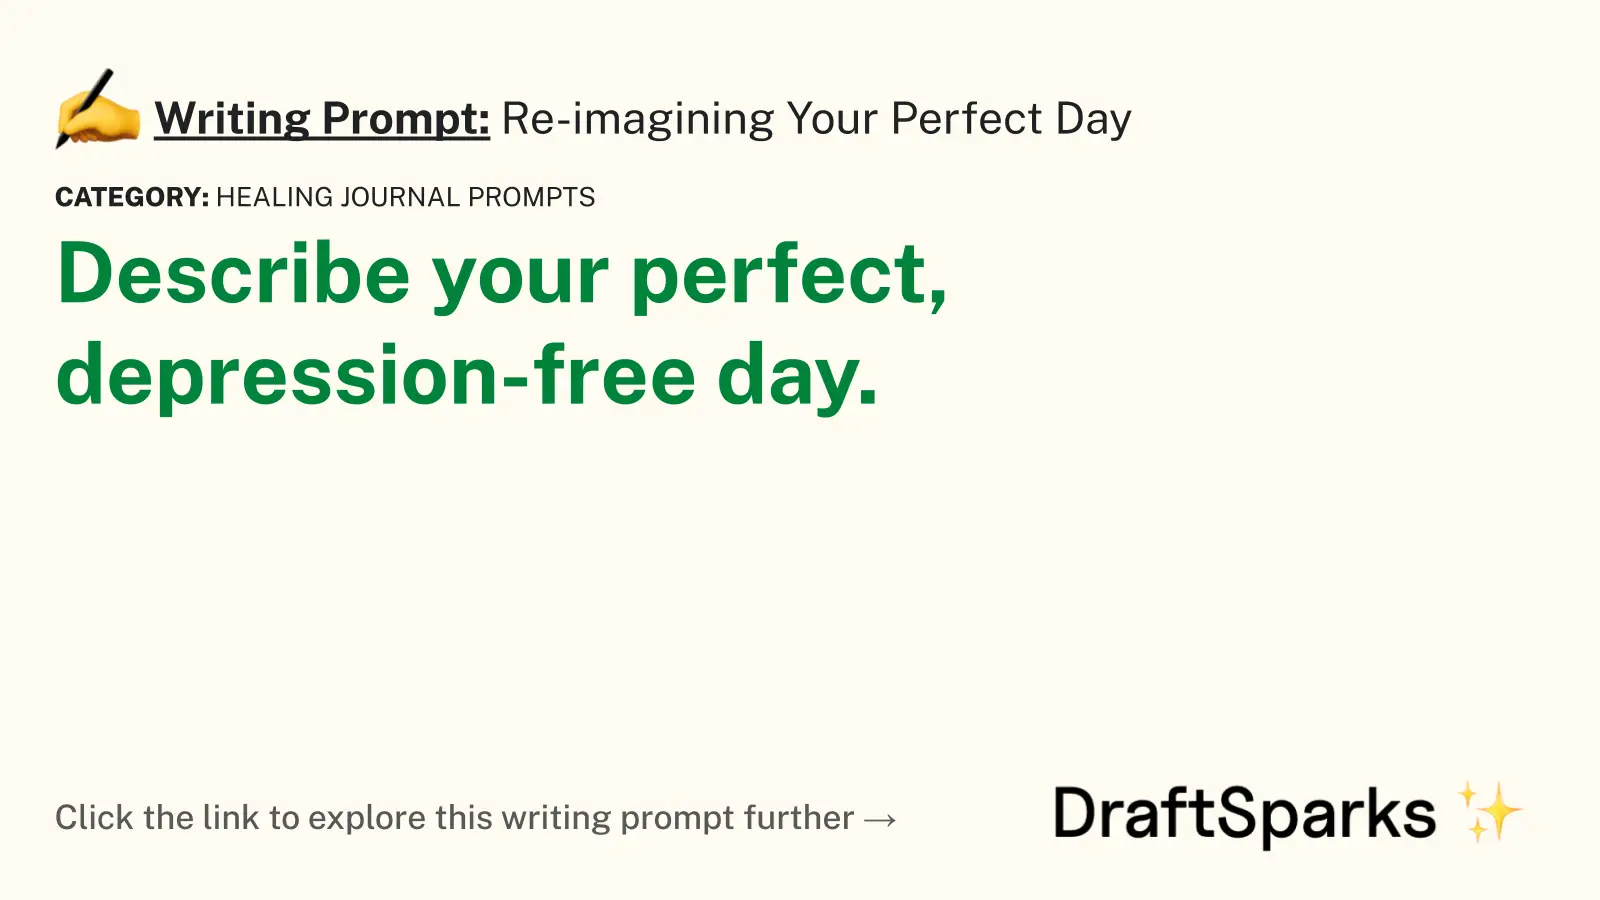 Re-imagining Your Perfect Day